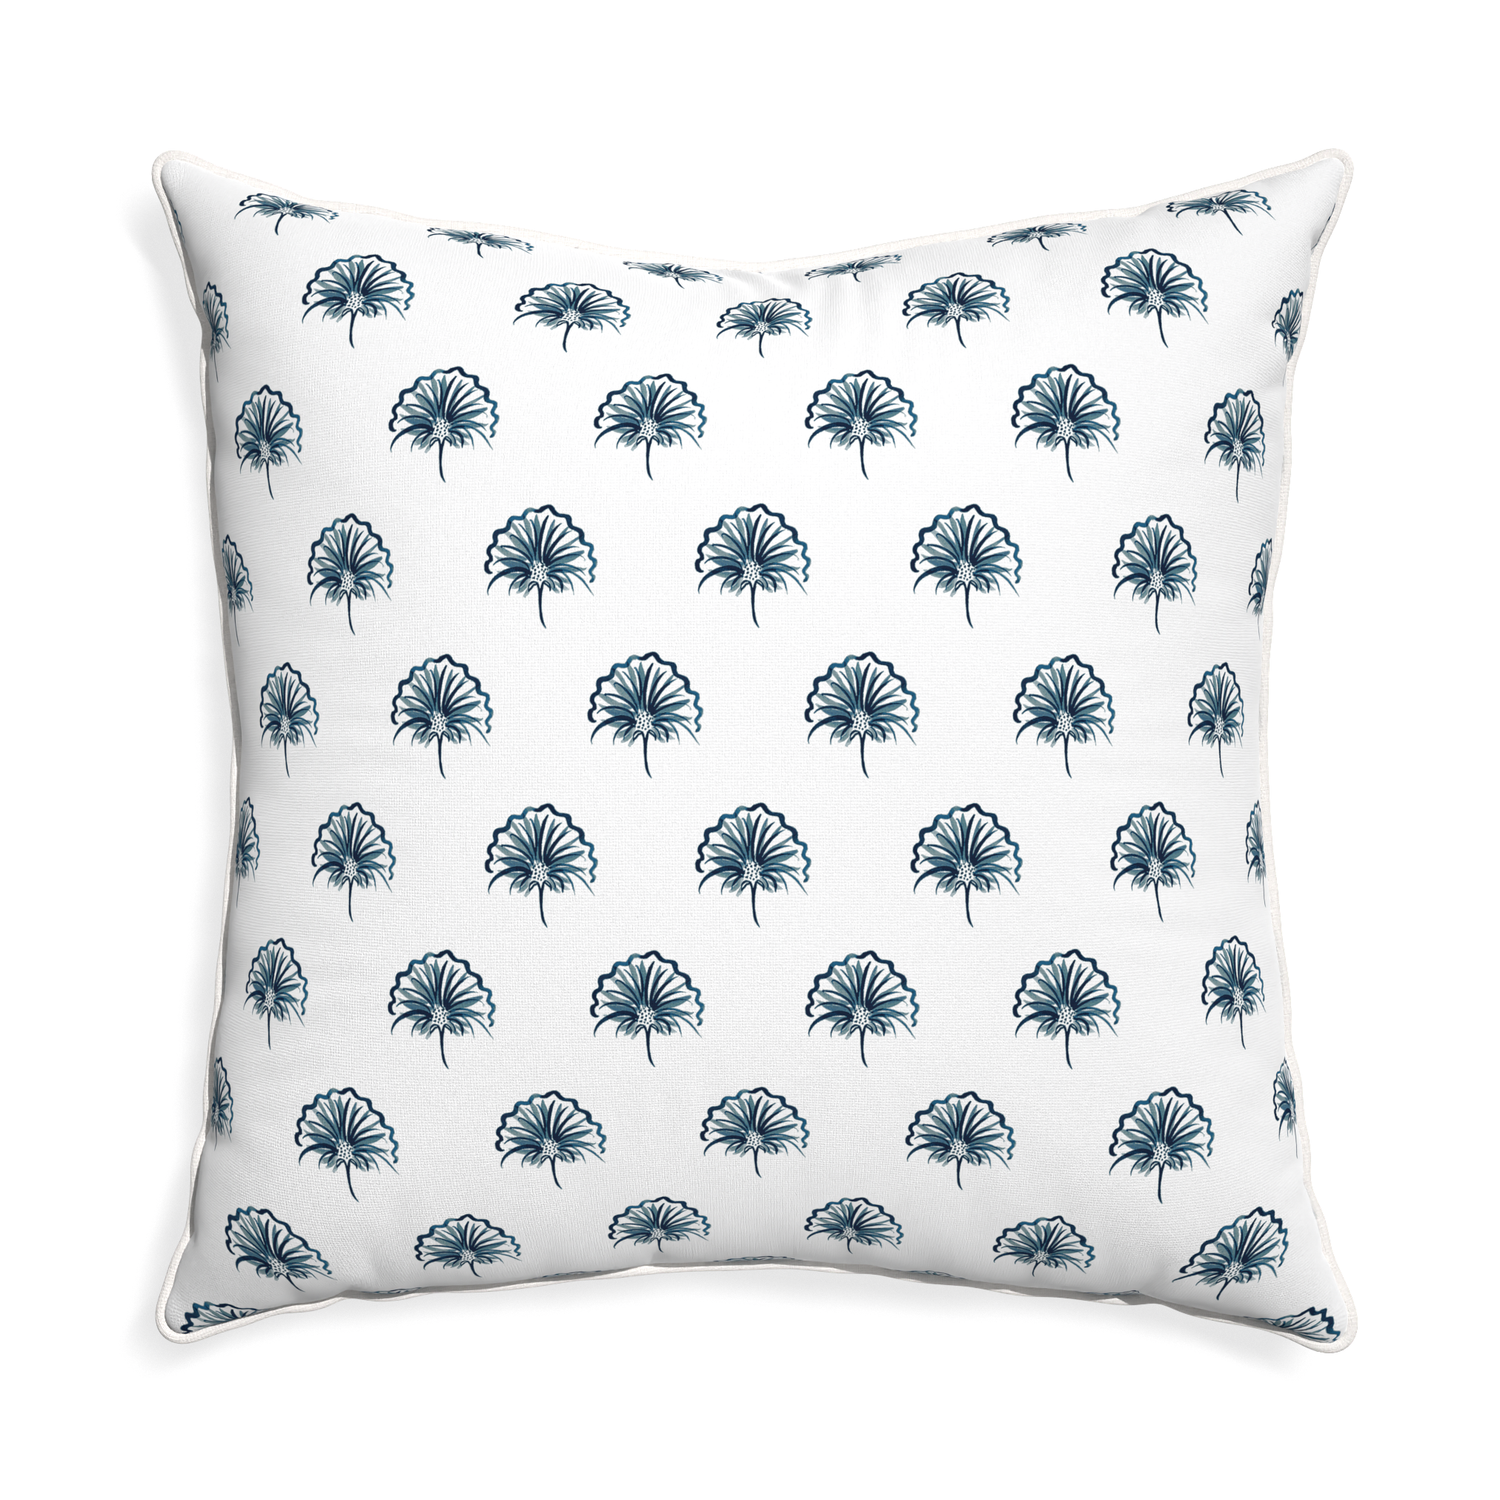 Euro-sham penelope midnight custom floral navypillow with snow piping on white background